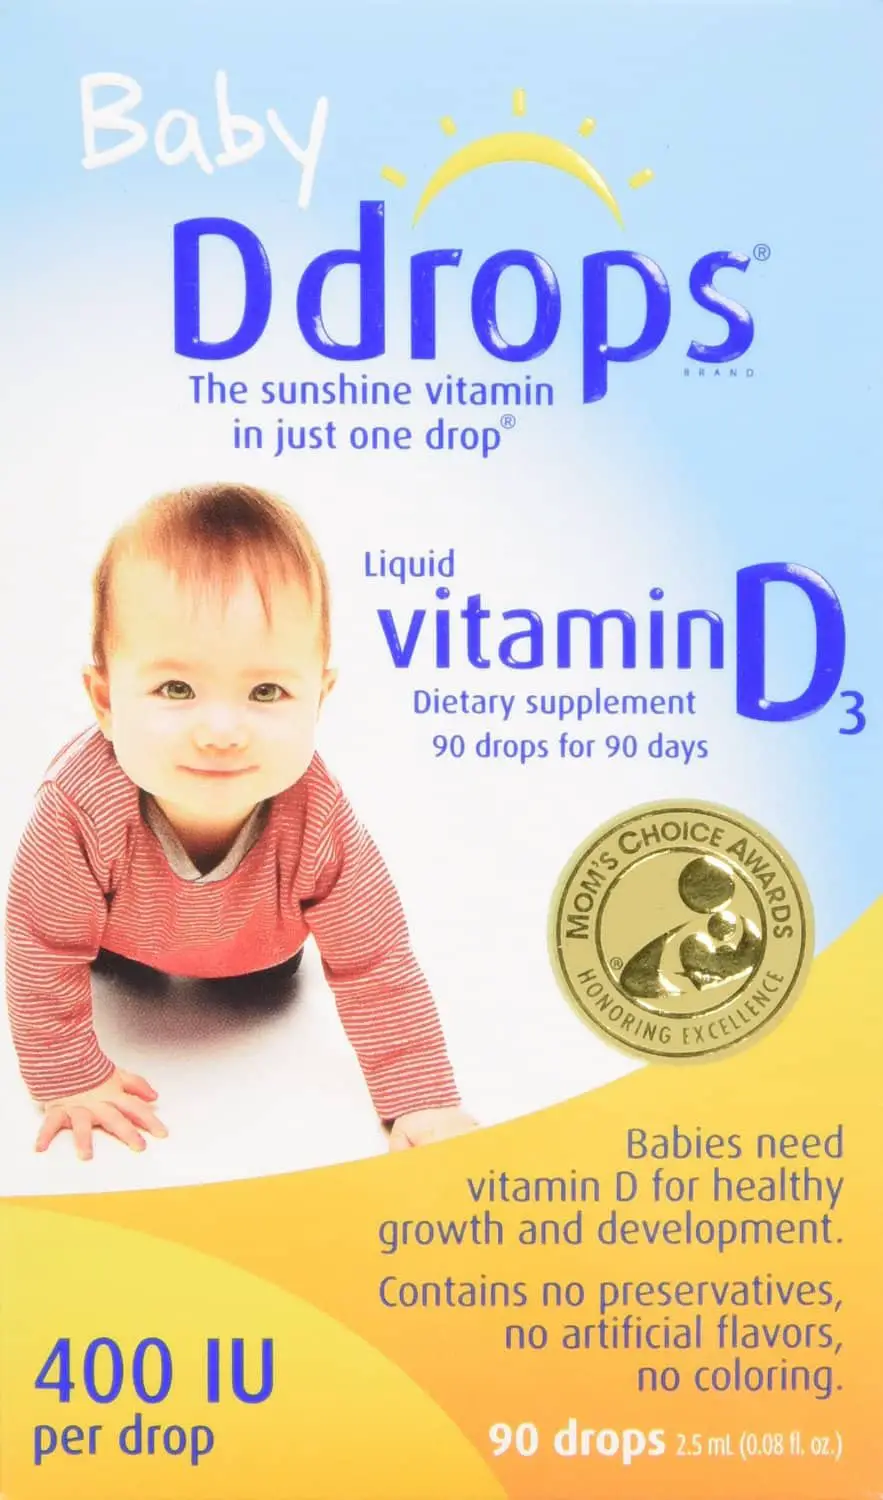 Best Vitamin D Drops for Baby: Baby Ddrops Review